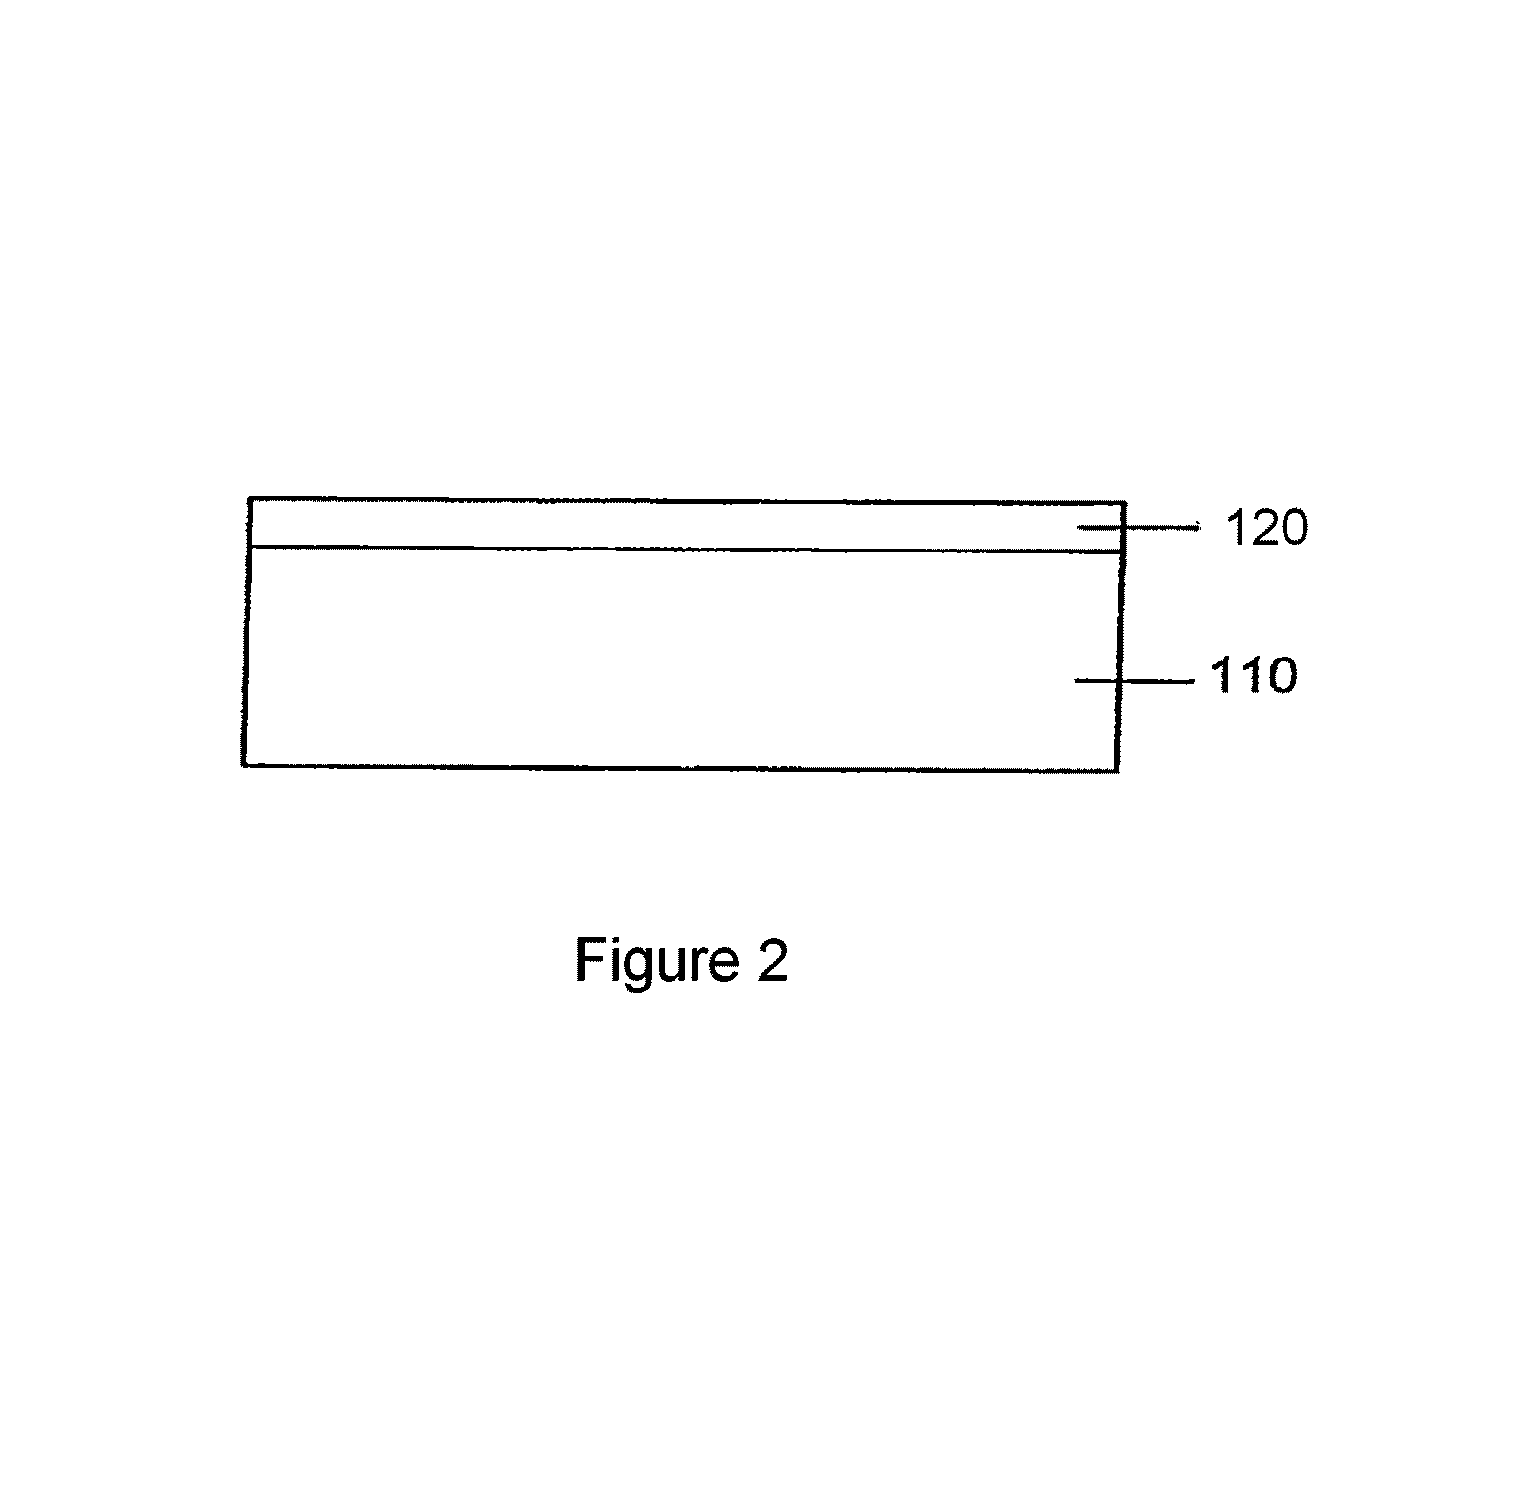 Sulfide species treatment of thin film photovoltaic cell and manufacturing method